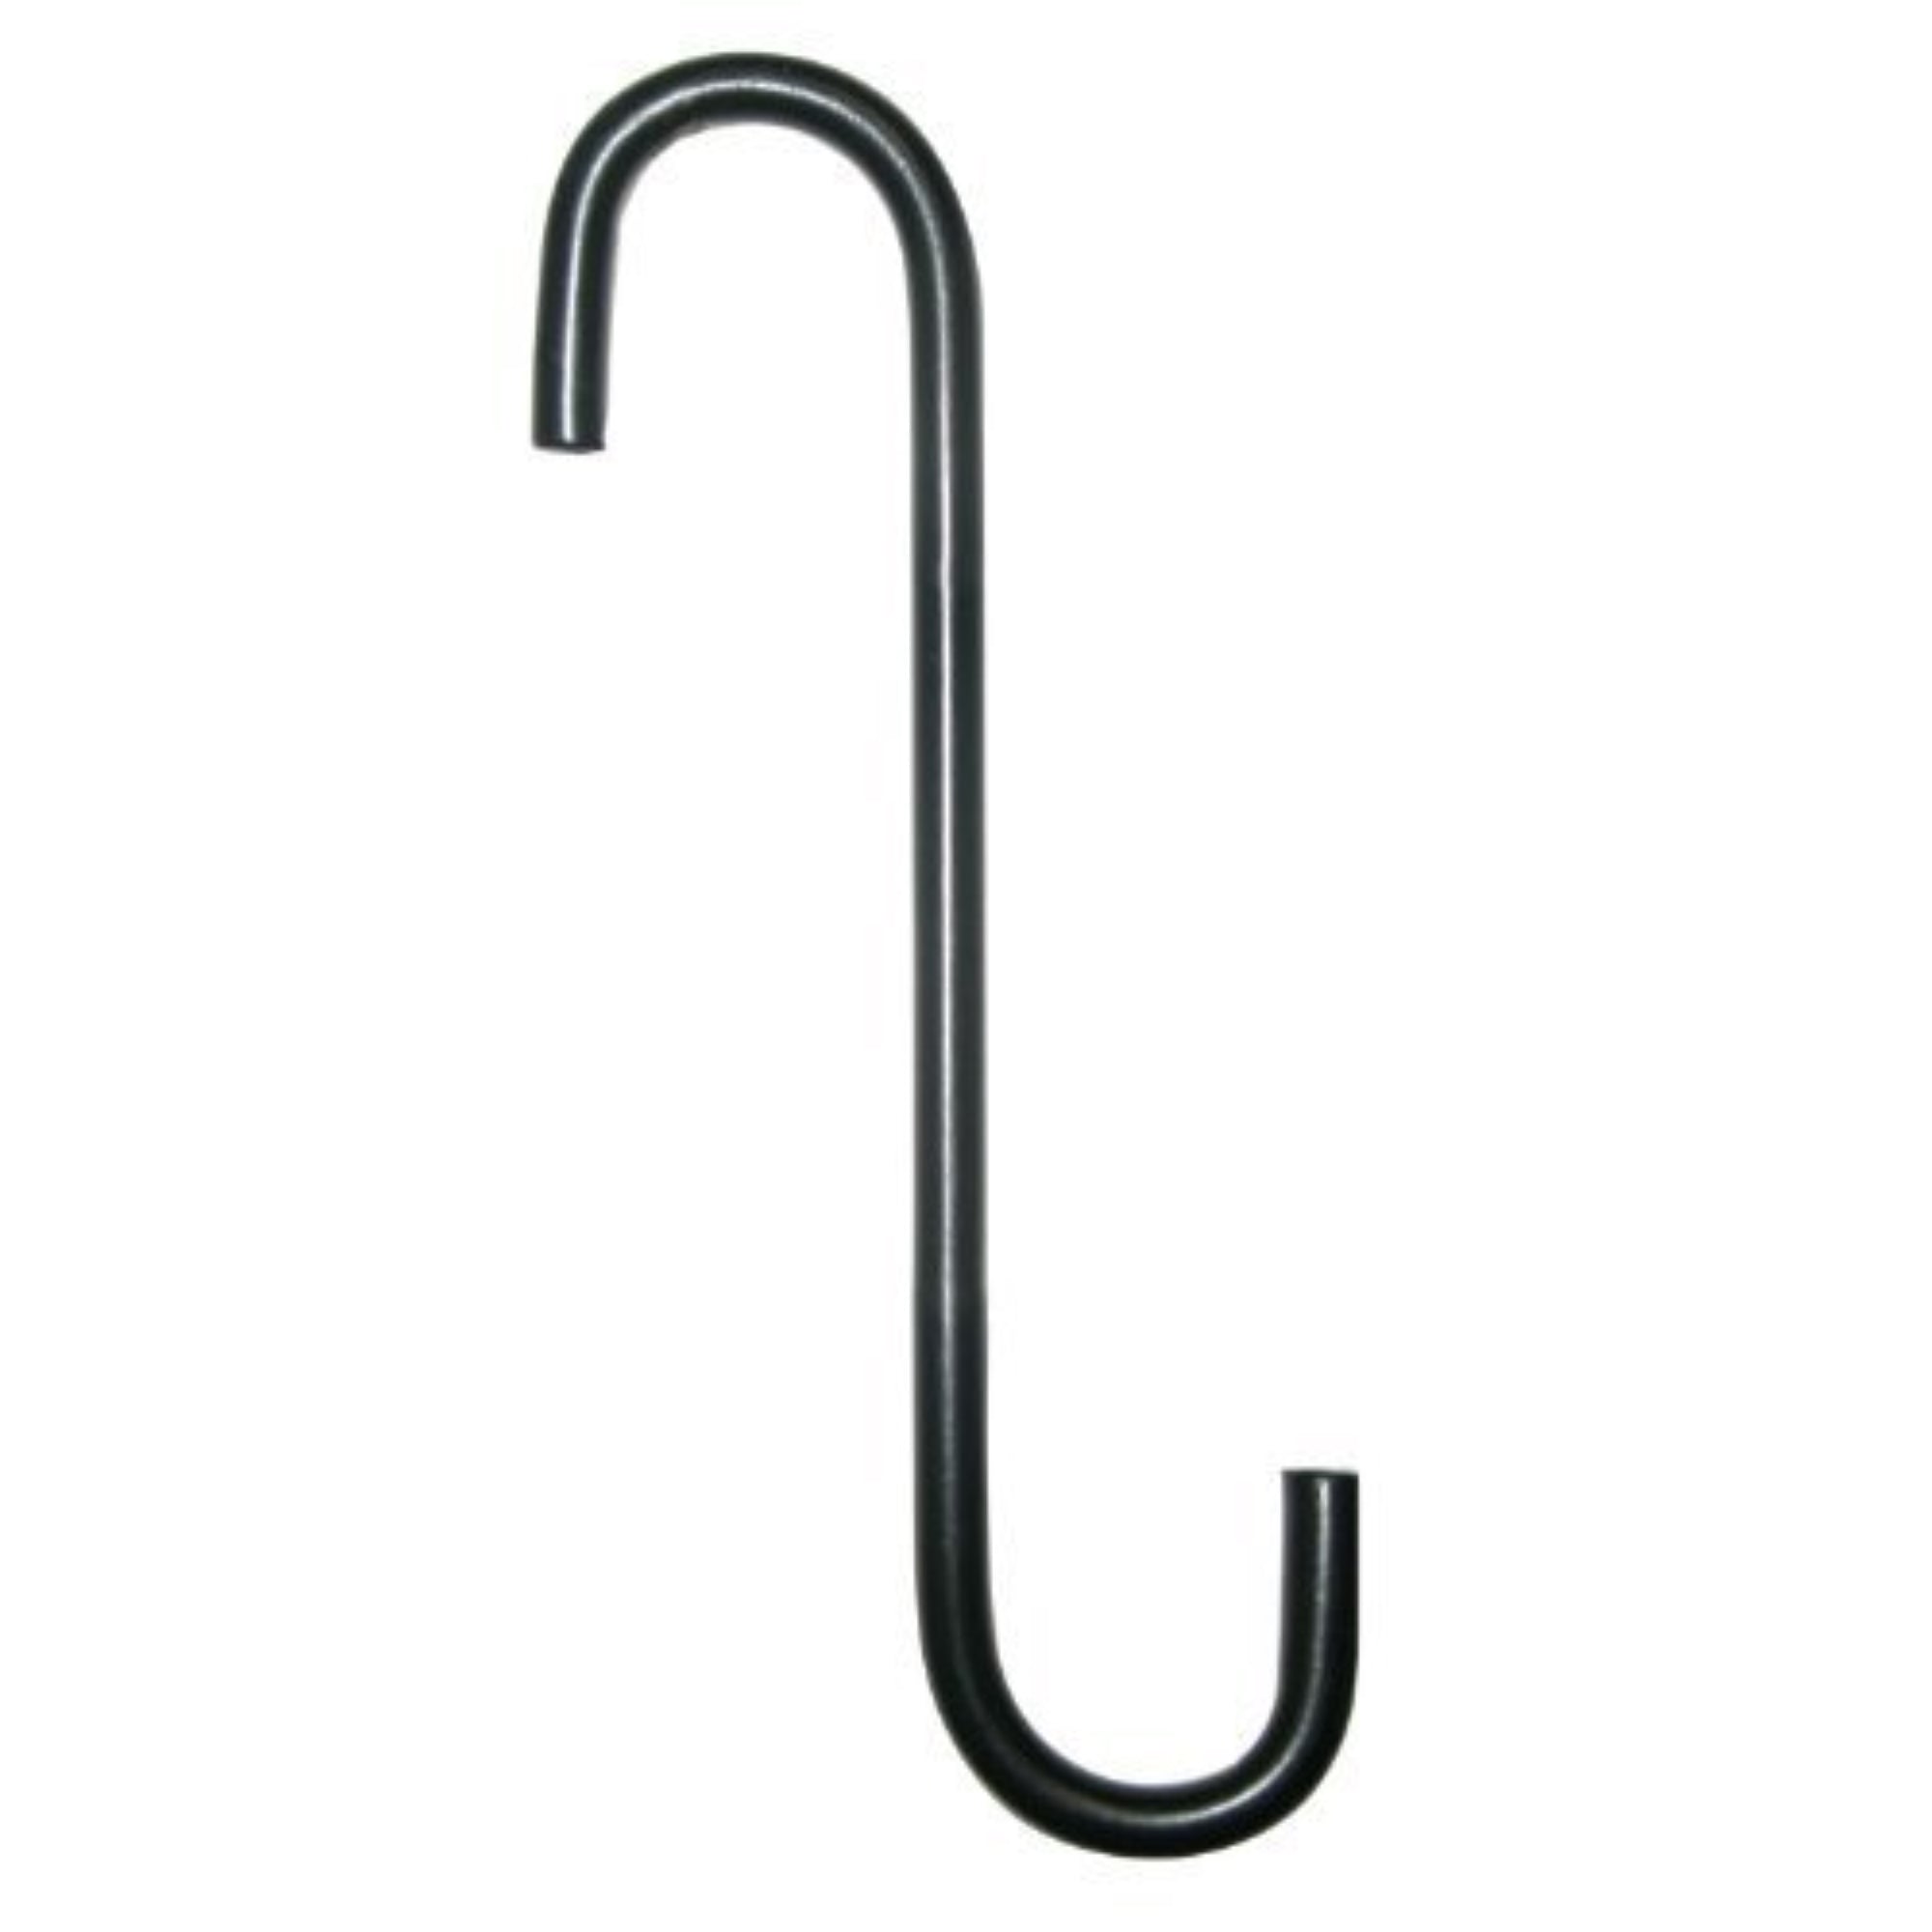 The Hookery RS6 6 inch S Extension Hook